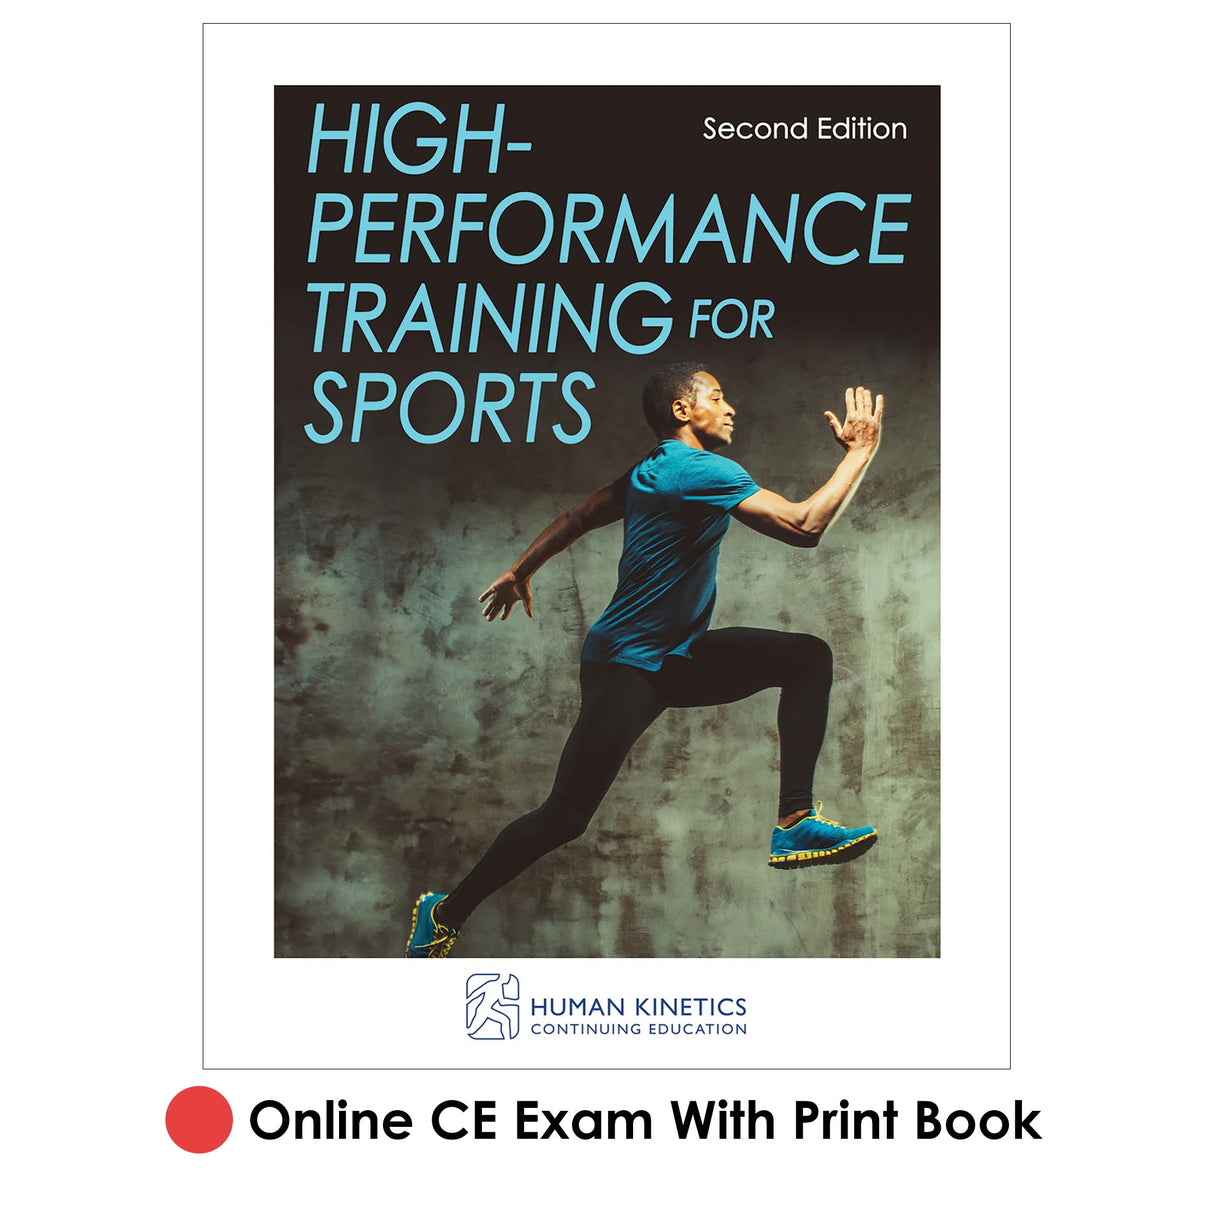 High-Performance Training for Sports 2nd Edition Online CE Exam With Print Book